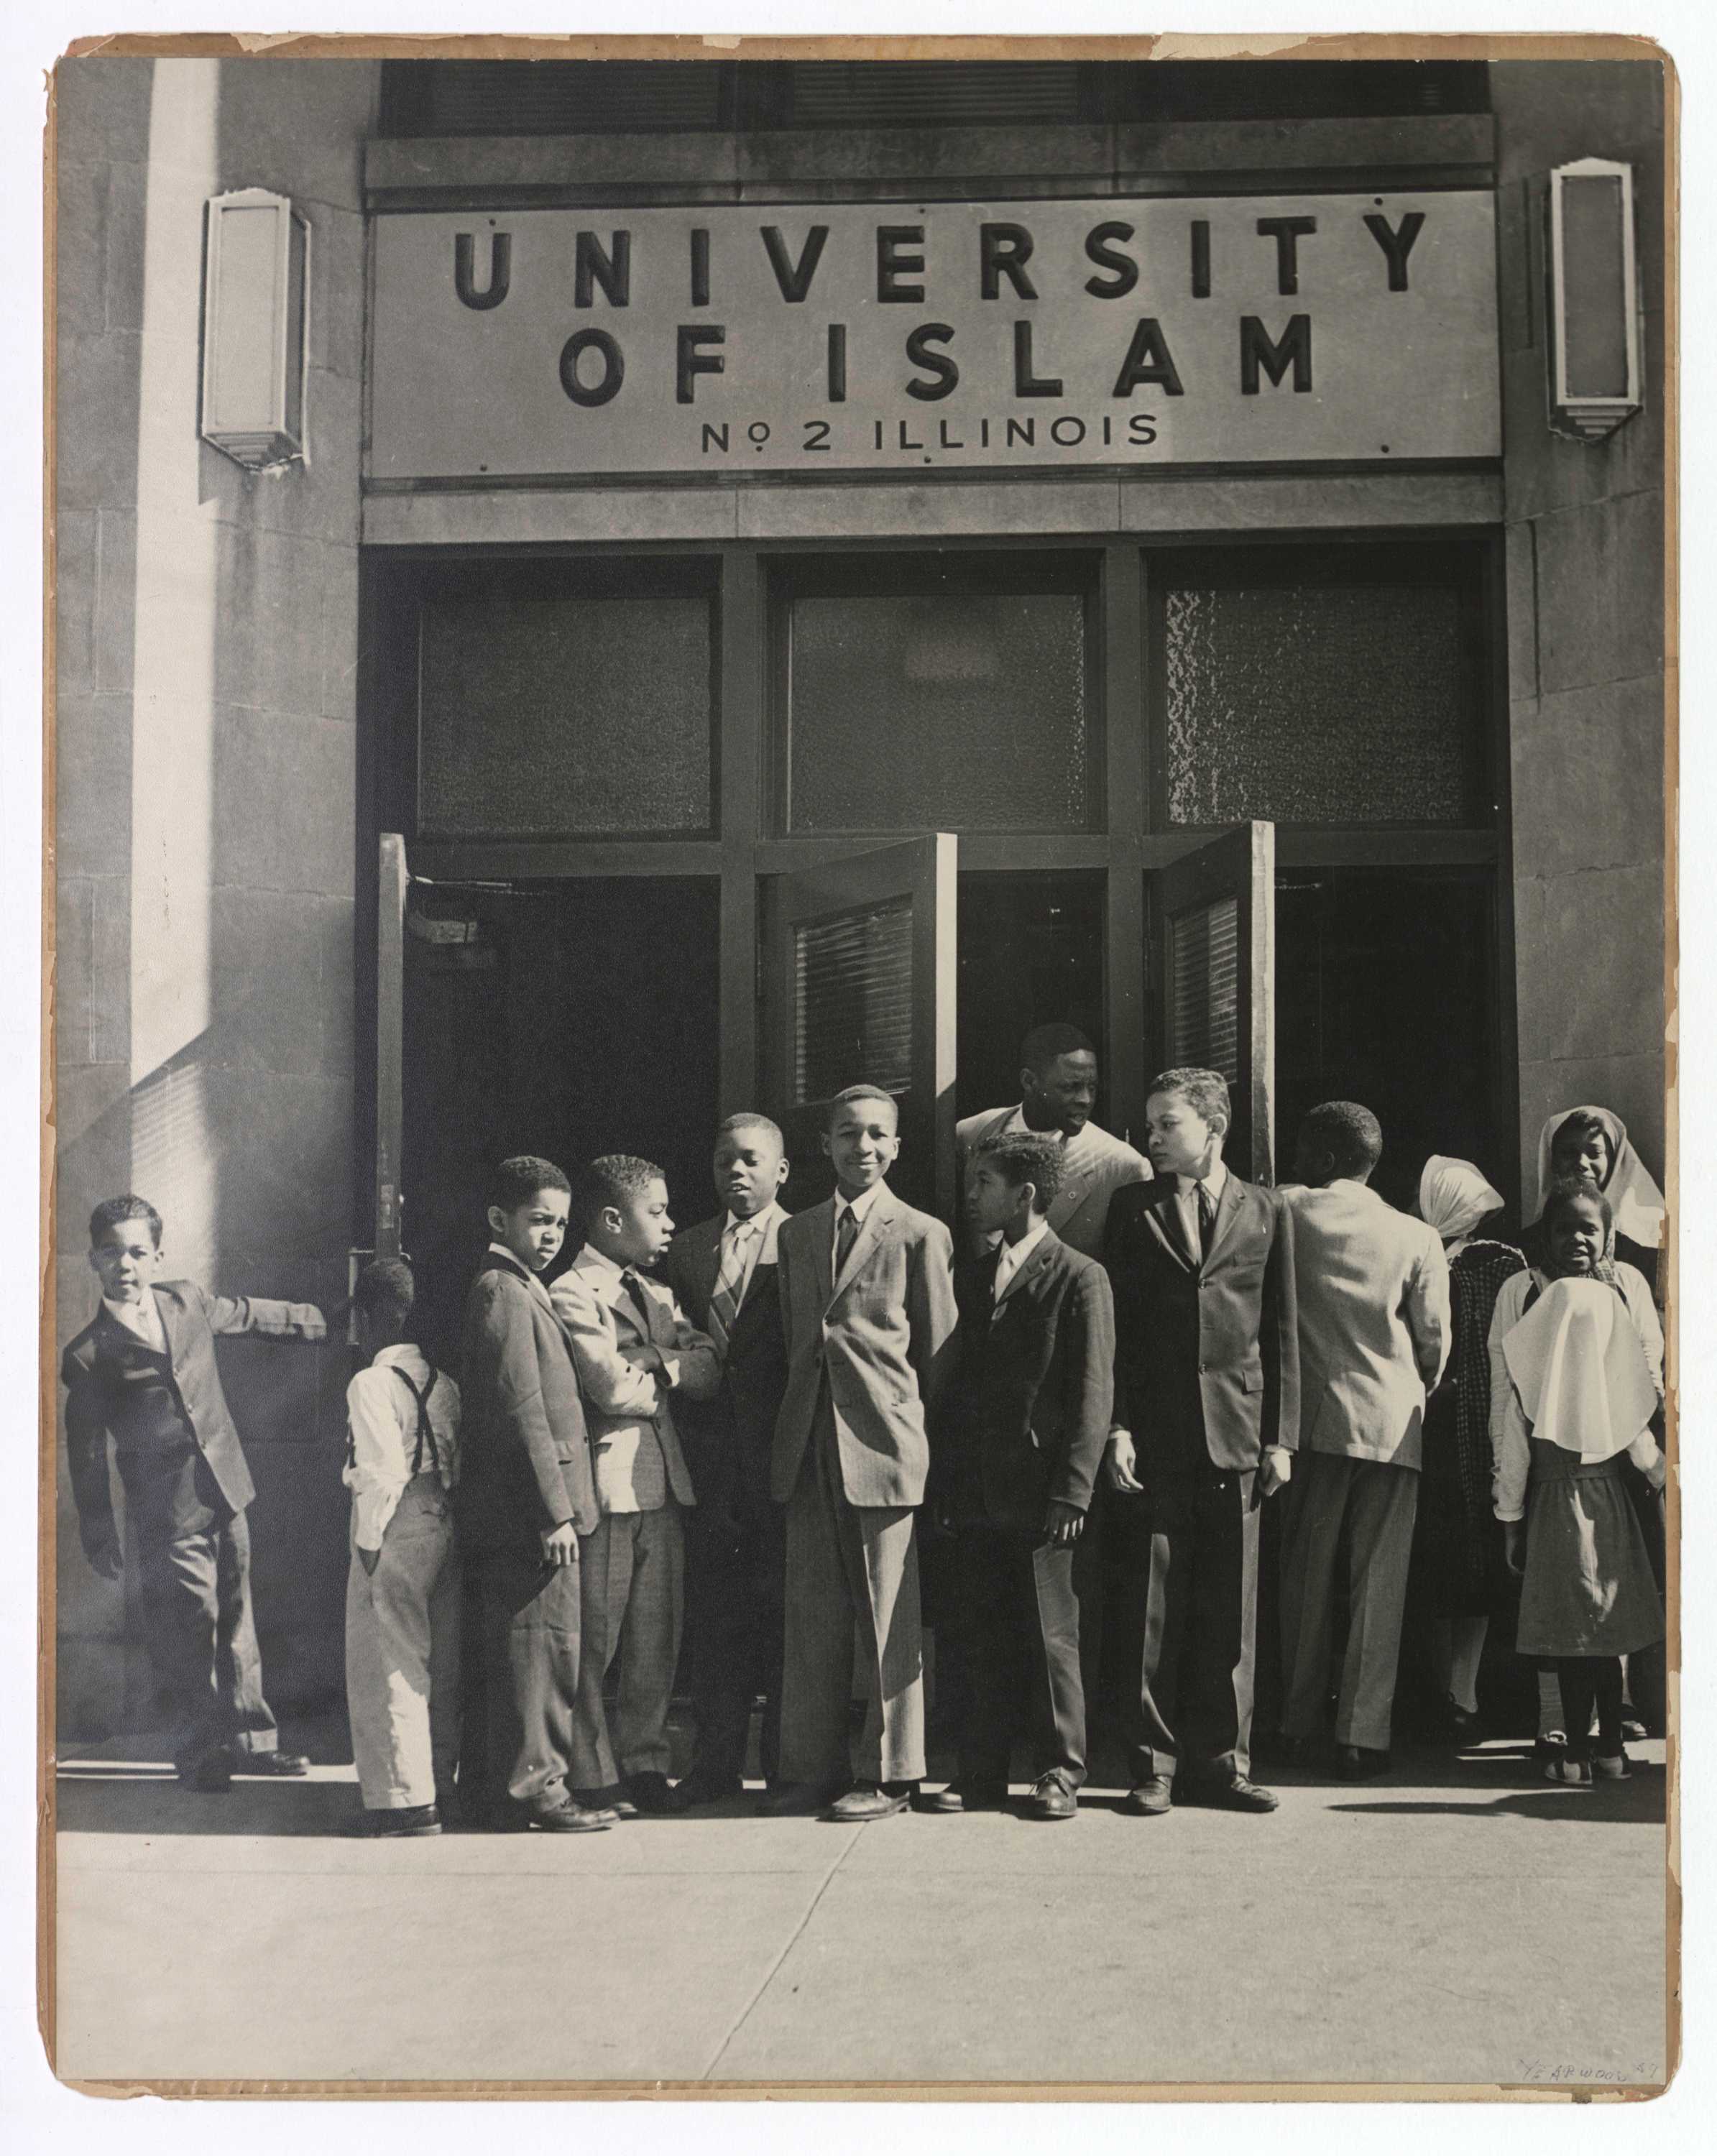 This black and white photograph depicts a group of children standing outside the front doors of the University of Islam.